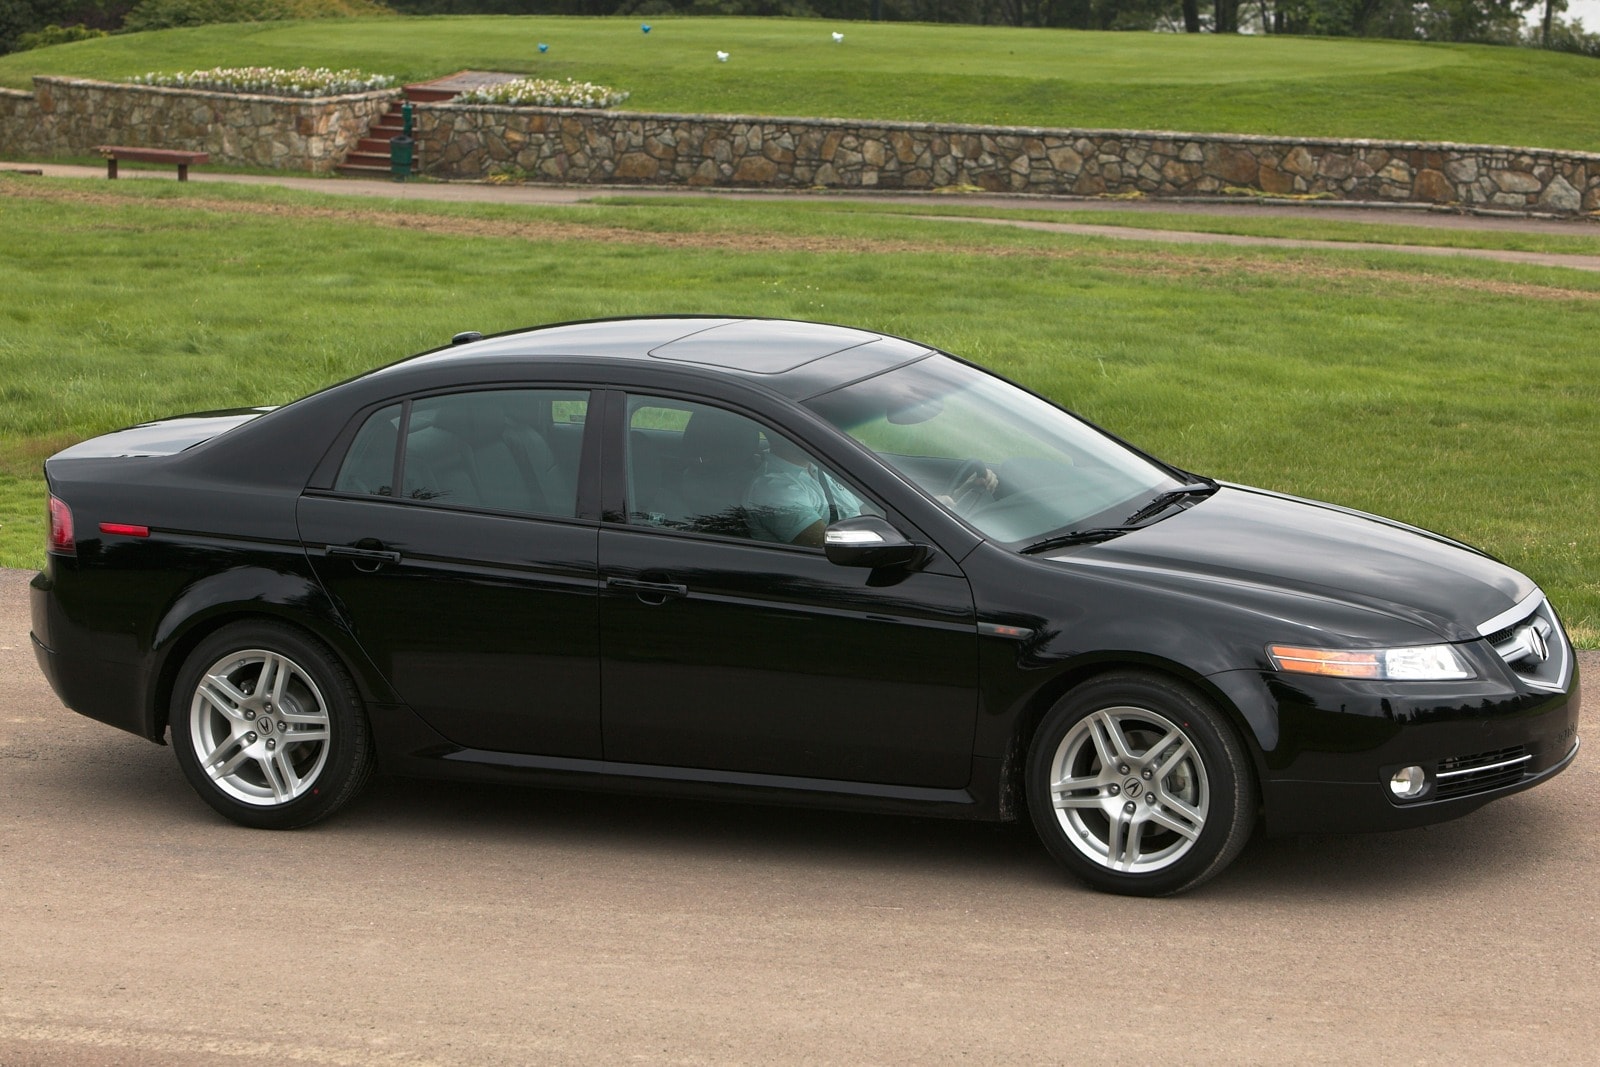 2008 Acura TL Review & Ratings | Edmunds